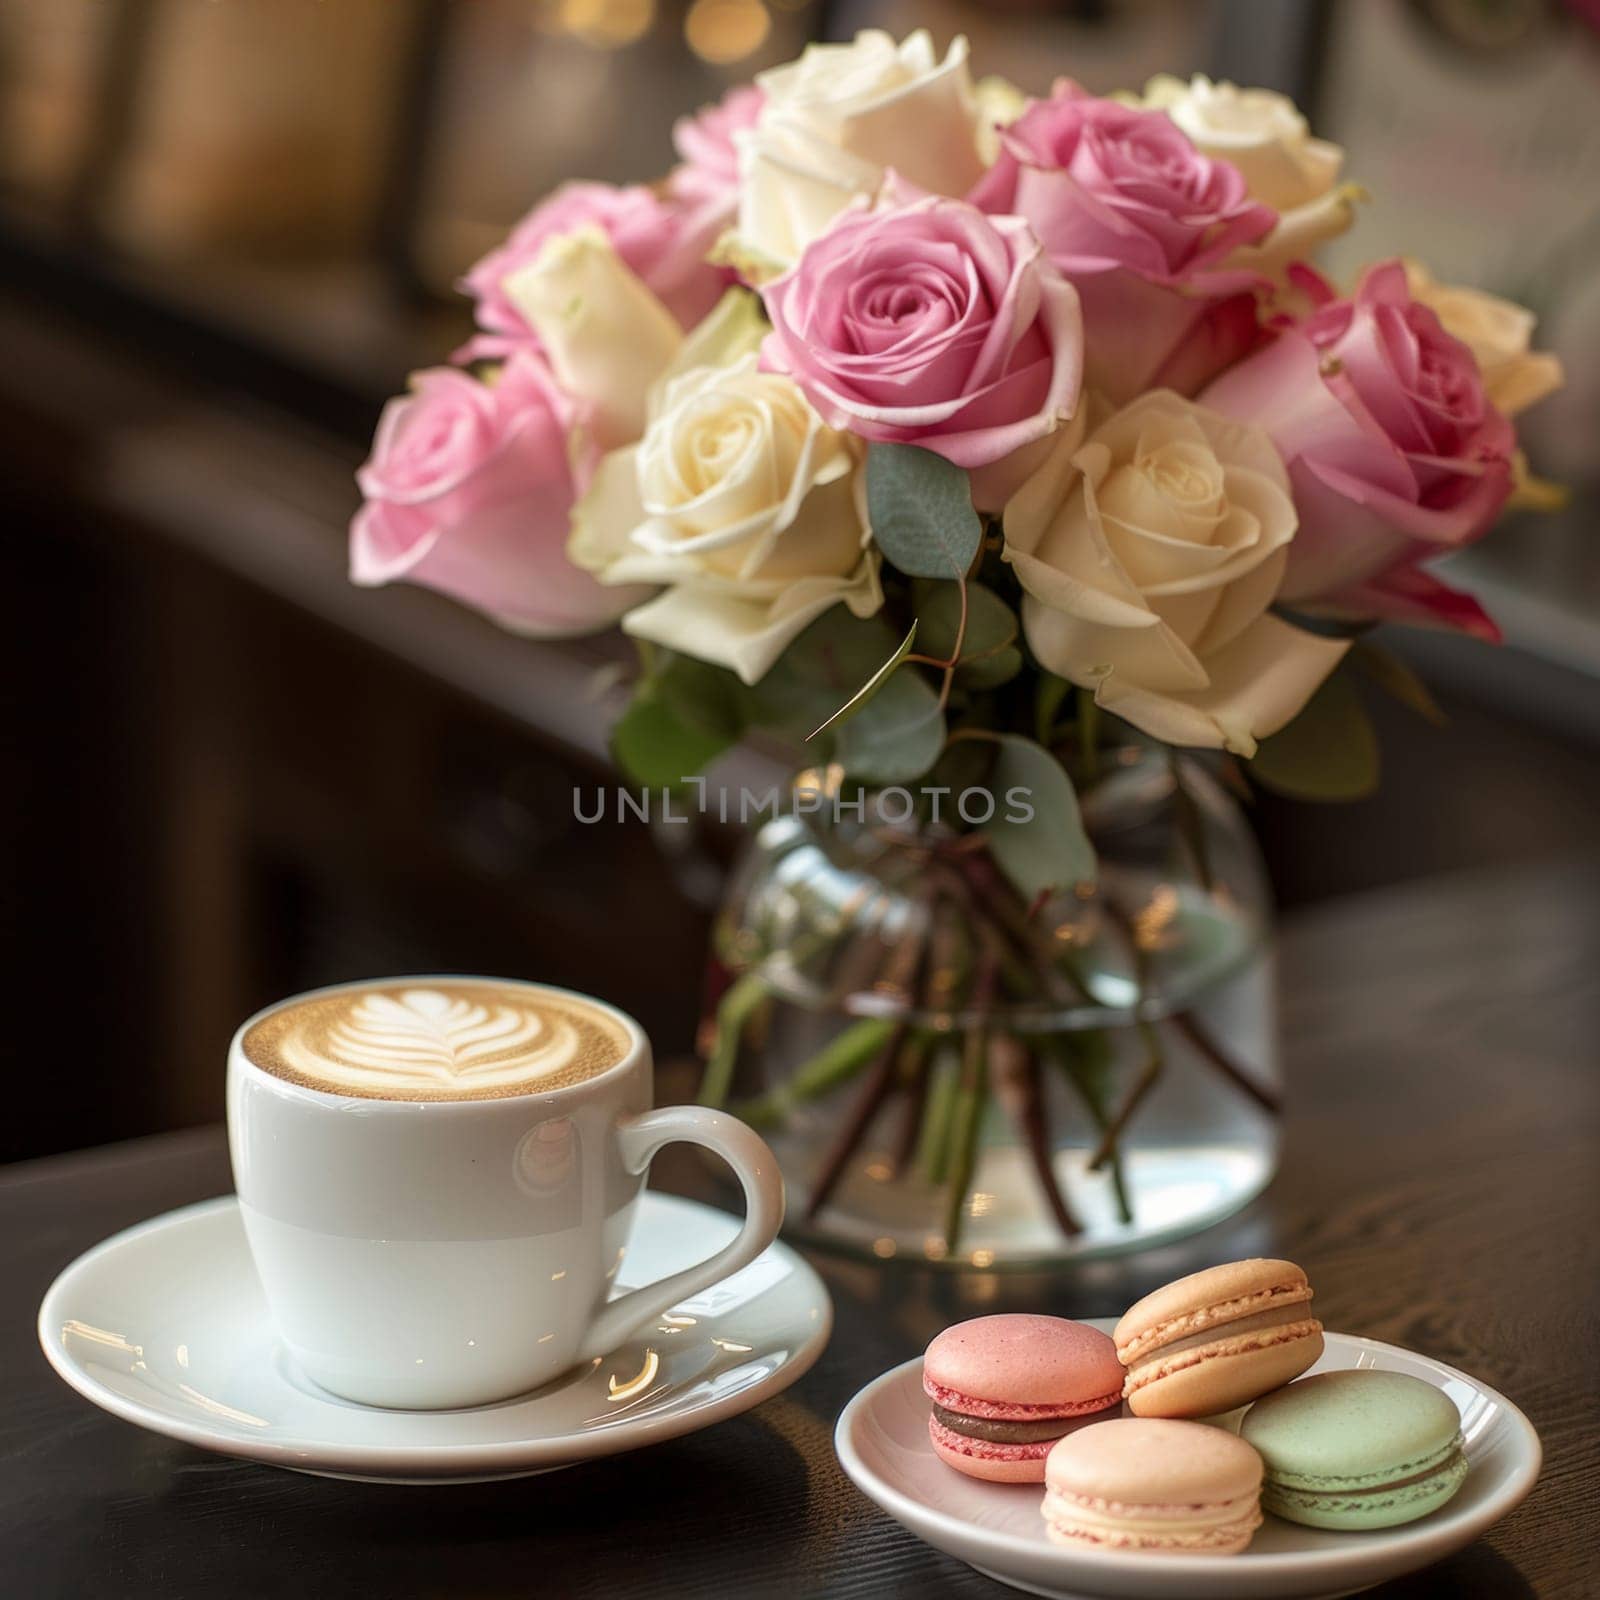 A cozy and elegant scene of a capuccino cup with foam design next to a vase of pink and cream roses. Colorful macarons add sweetness to the coffee by papatonic